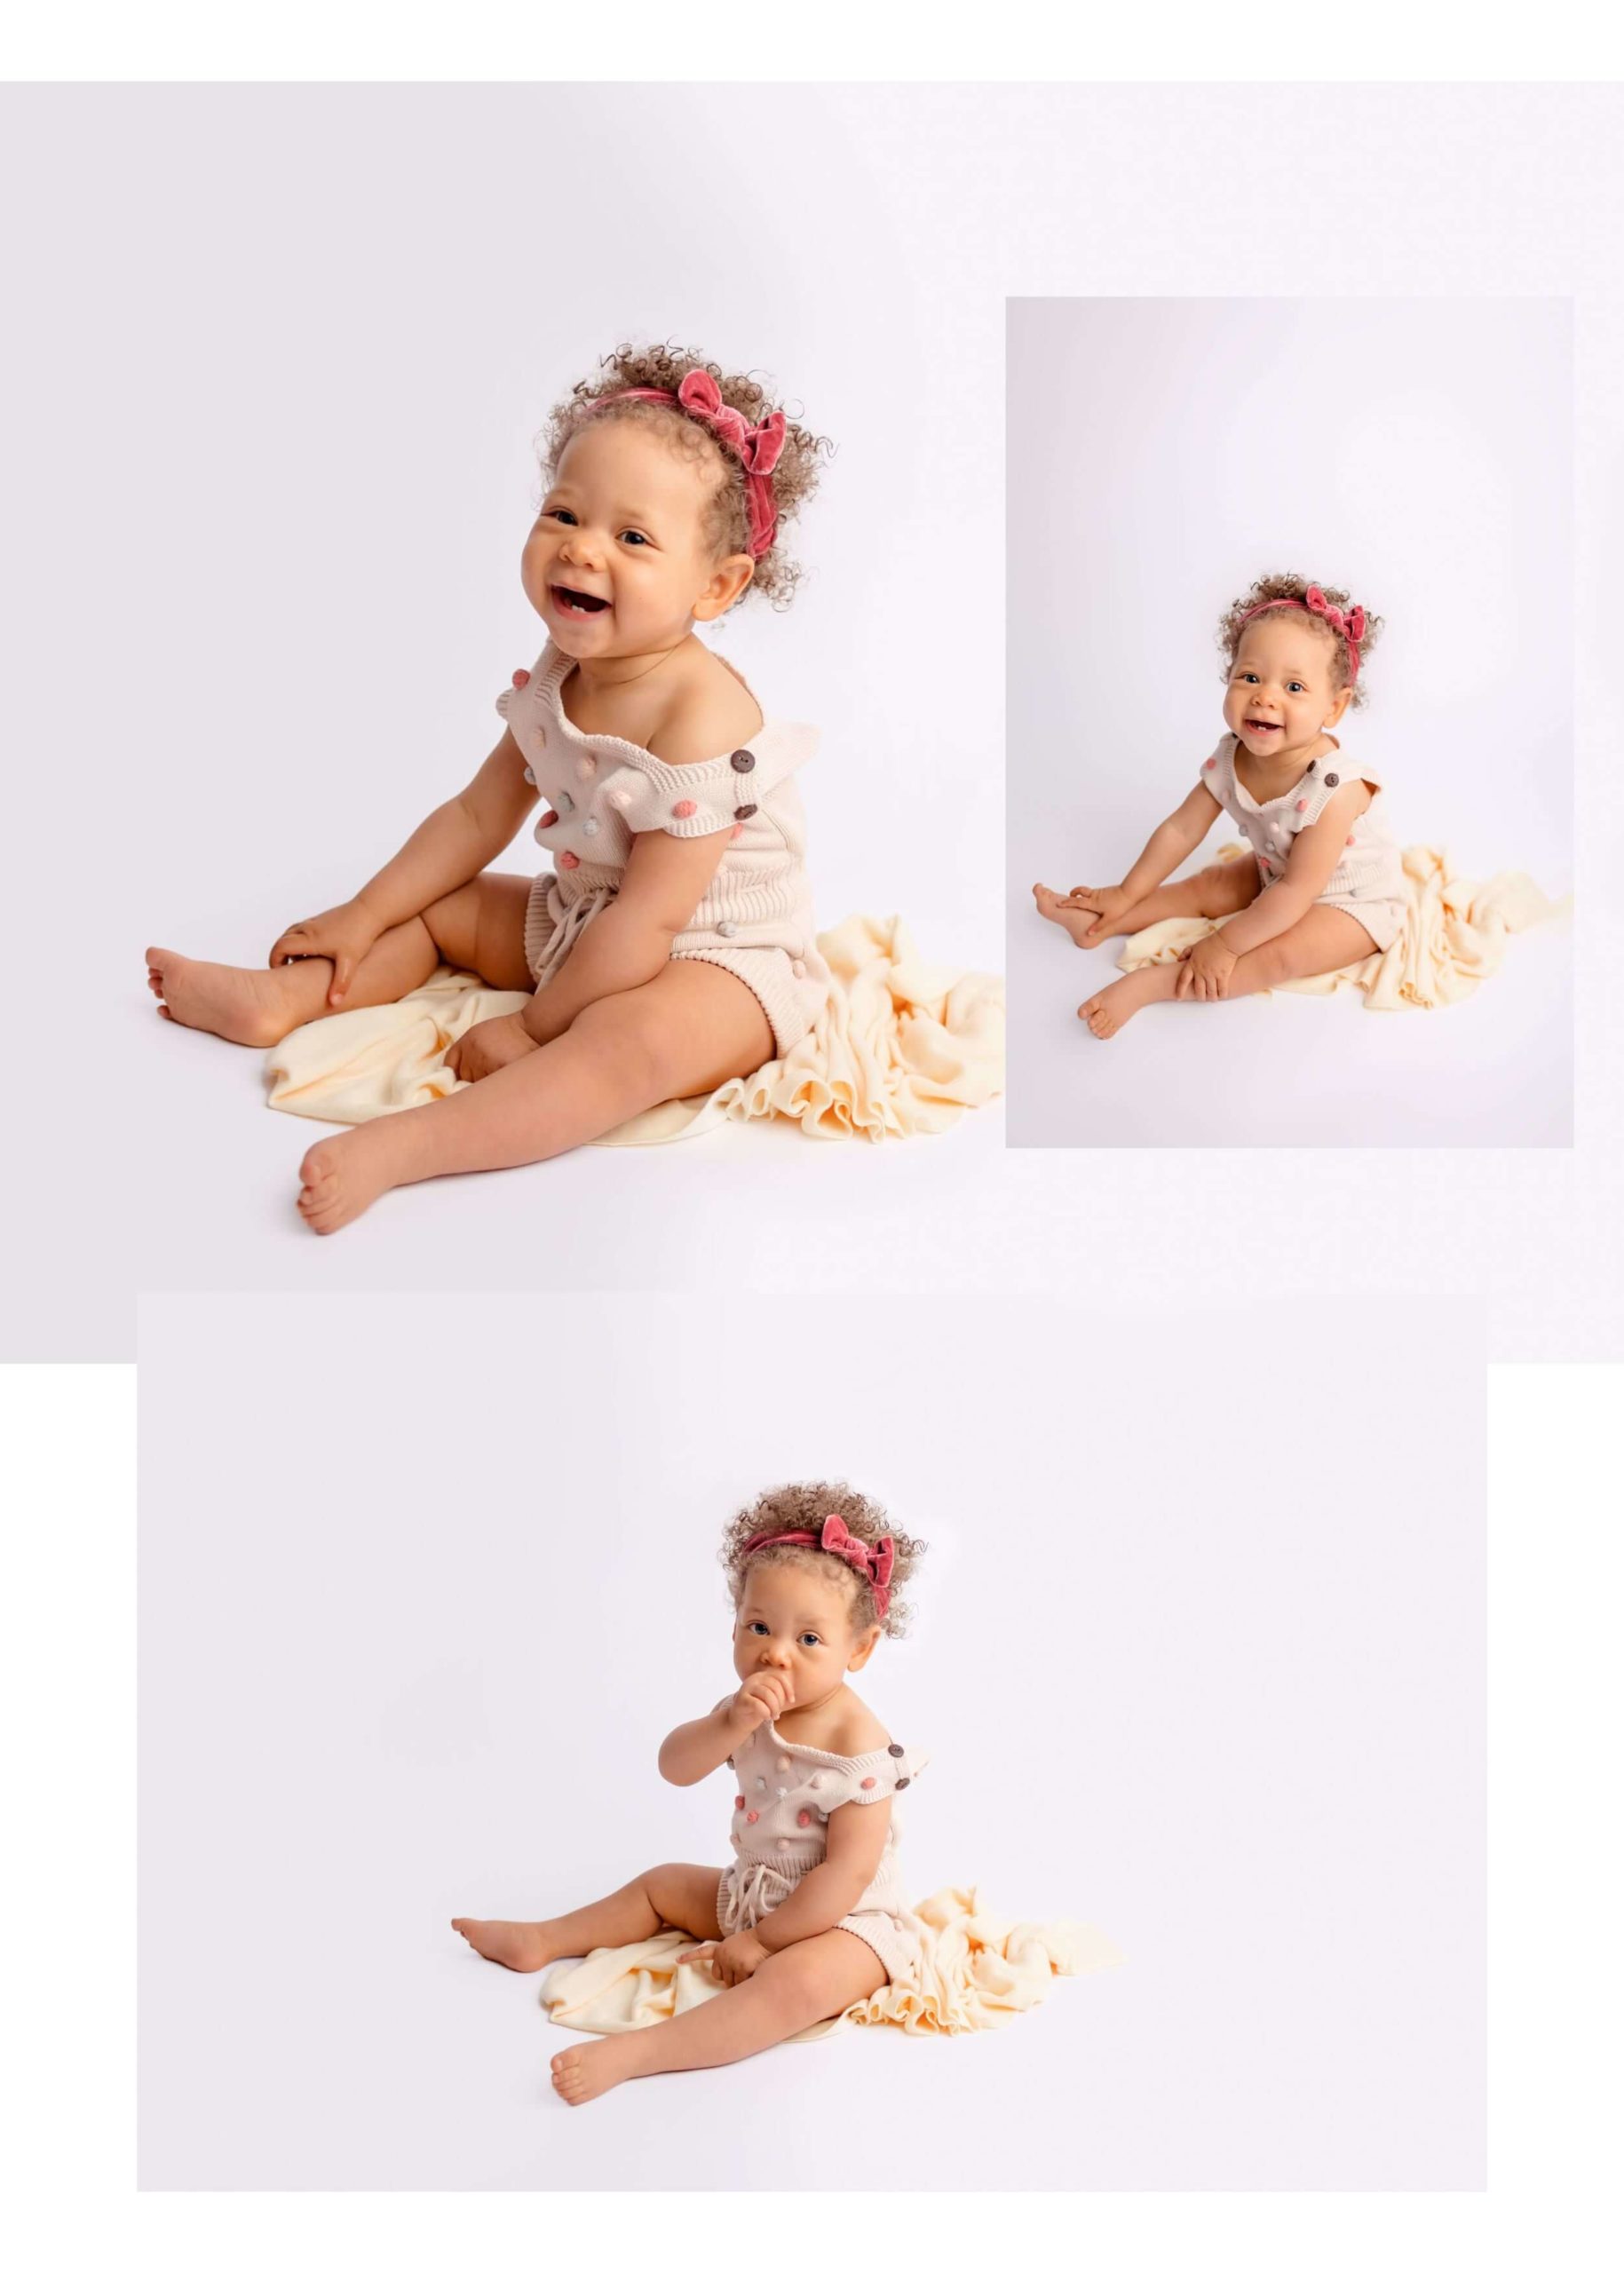 Top two images feature a little girl with curly hair and a big bow sitting on the ground smiling at the camera. The bottom picture is of the same girl but with her thumb in her mouth and looking serious during her La Mesa Studio Cake Smash Pictures